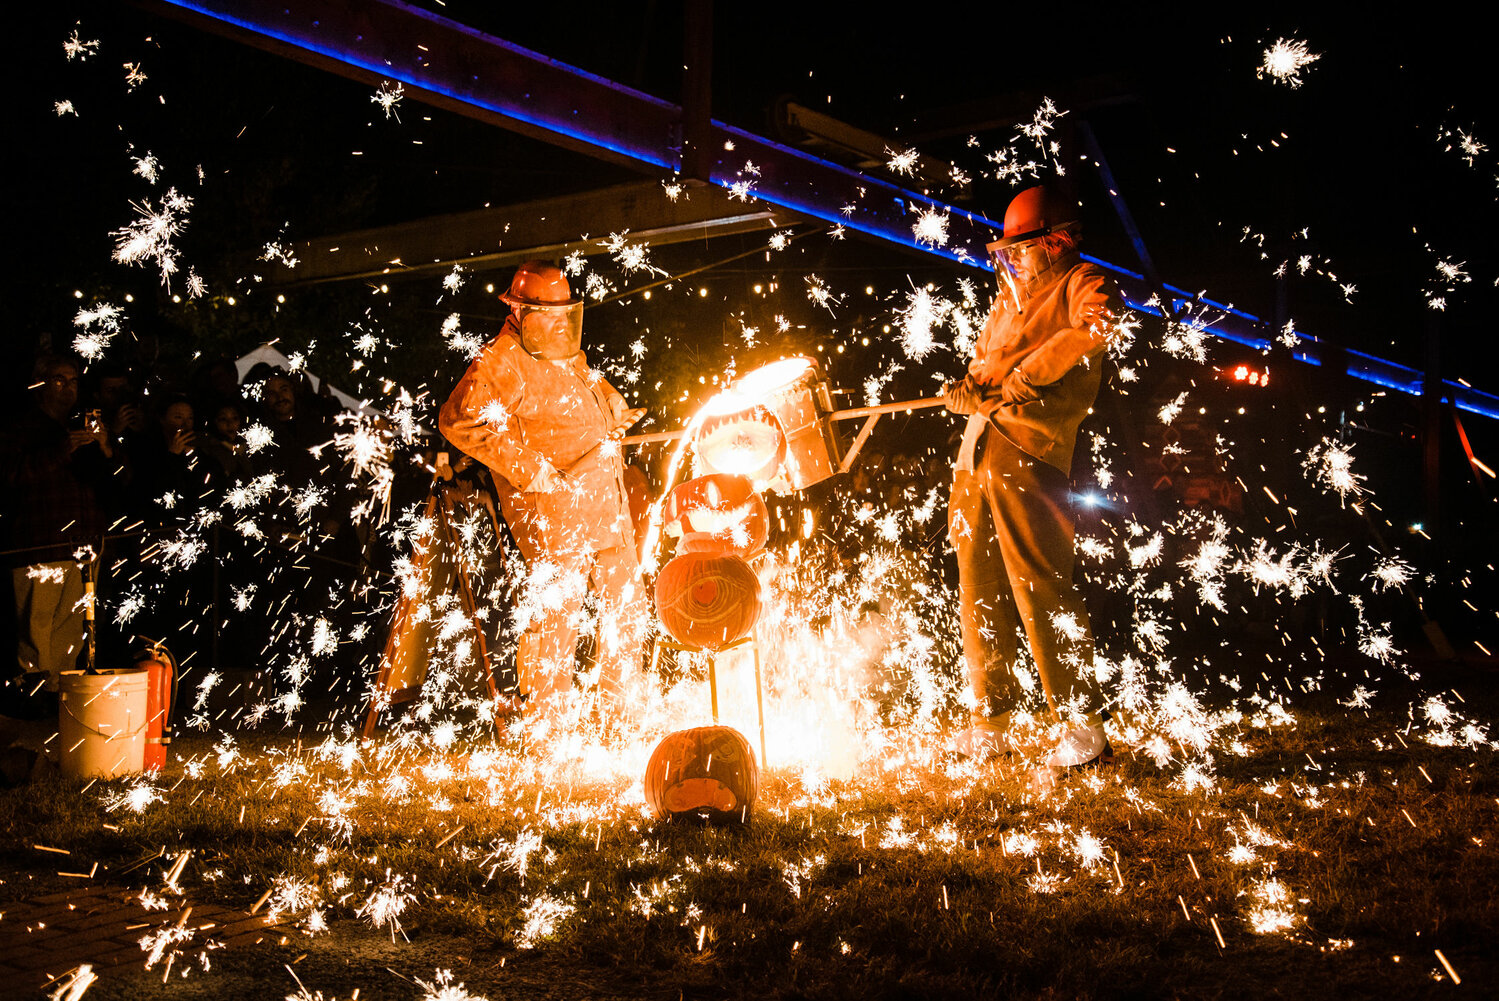 The rescheduled Iron Pour promises a fiery spectacle at The Steel Yard